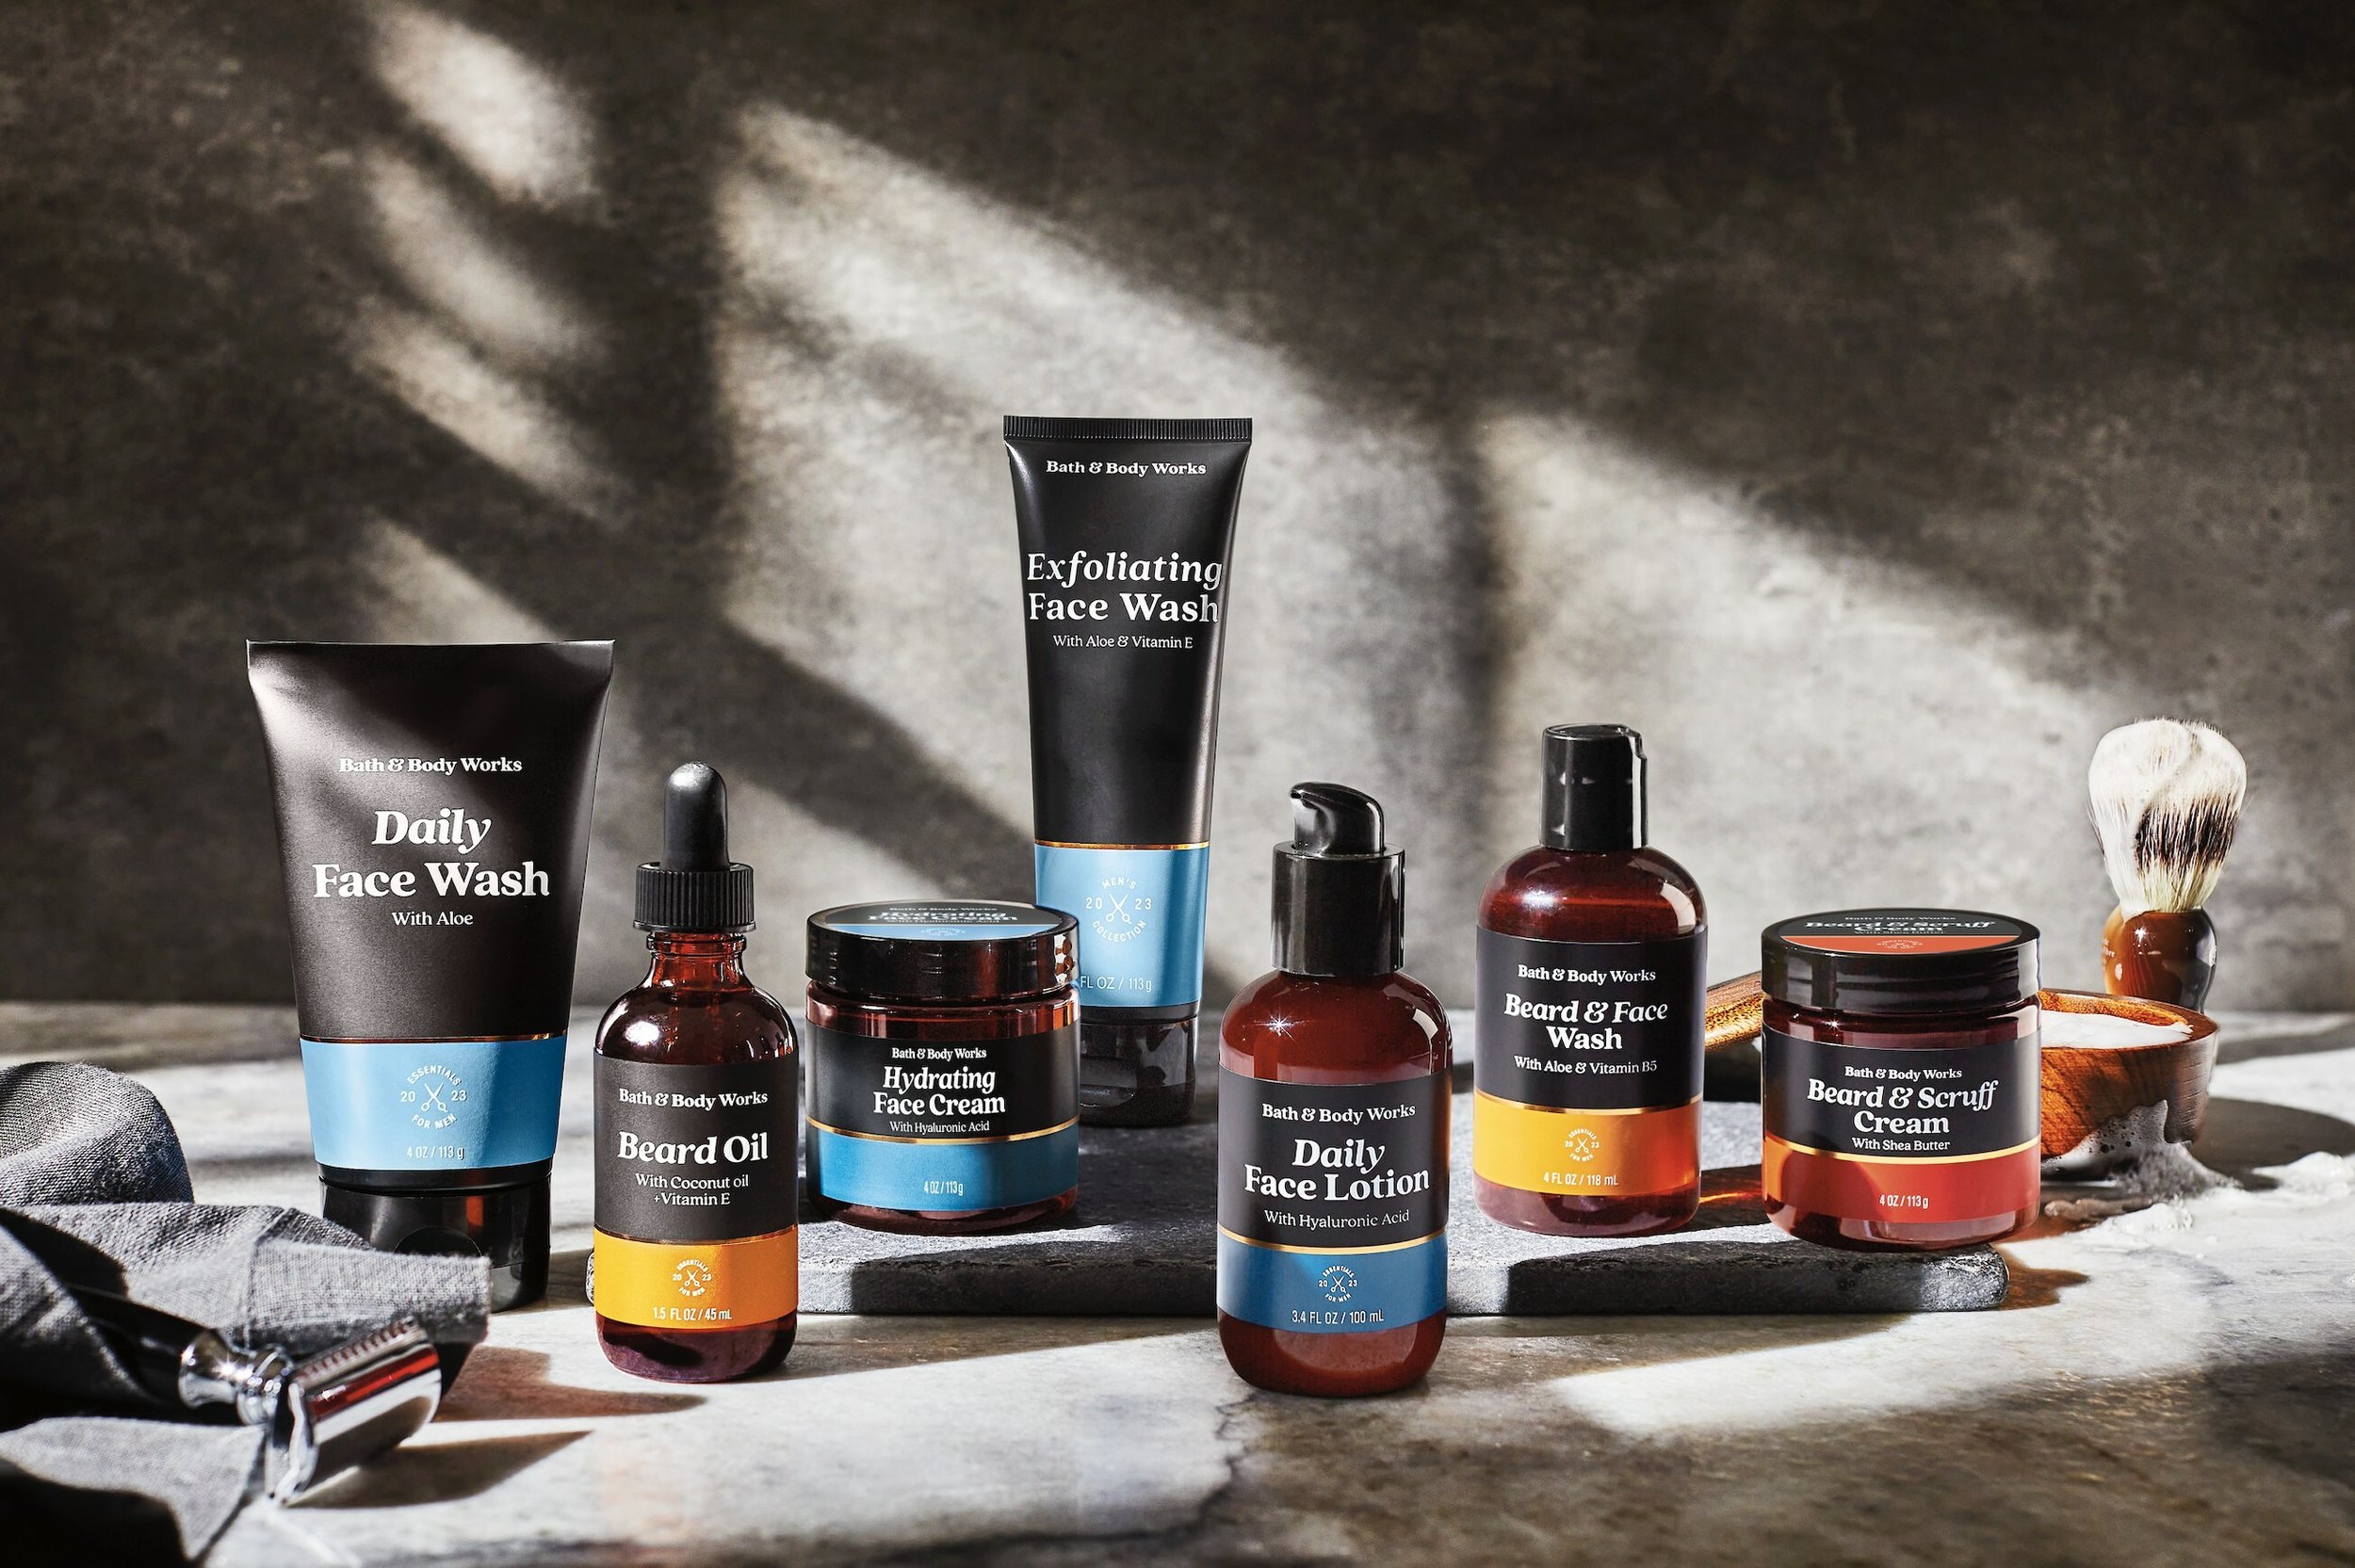 Bath & Body Works: Men's Body Care only $5.95 today!